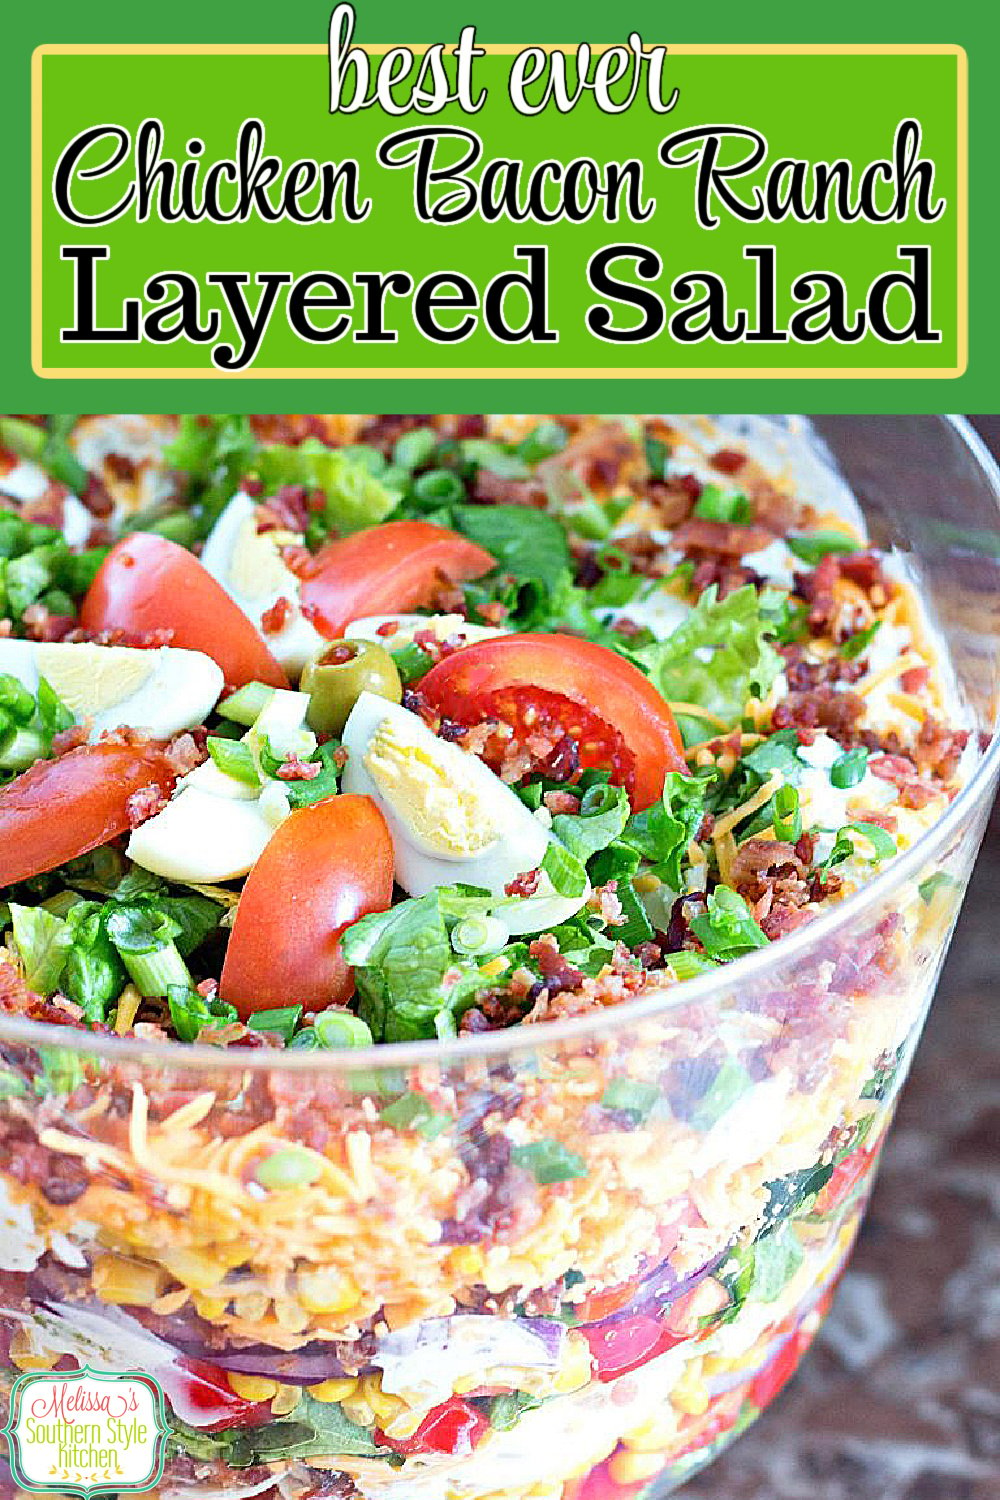 Enjoy this stunning Chicken Bacon Ranch Layer Salad as a side dish or an entree #chickenbaconranch #layersalad #chickenbaconranchsalad #chicken #bacon #salads #saladrecipes #sideidishrecipes #dinnerideas #dinner #southernfood #ranchdressing #southernrecipes via @melissasssk